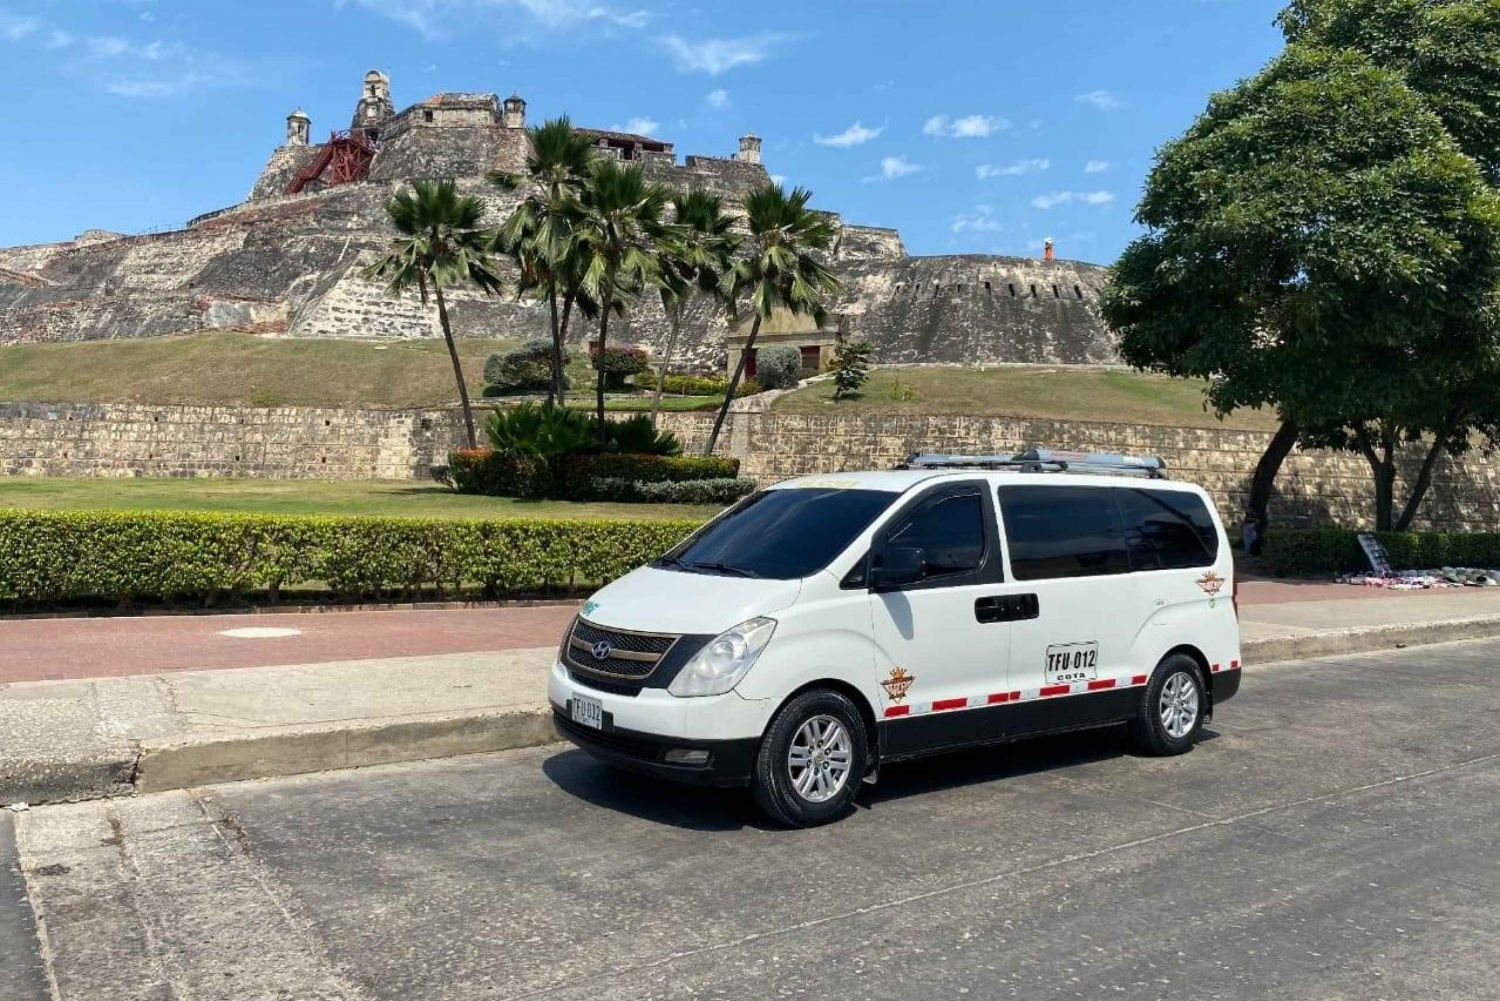 Private Transportation for 8 hours in Cartagena